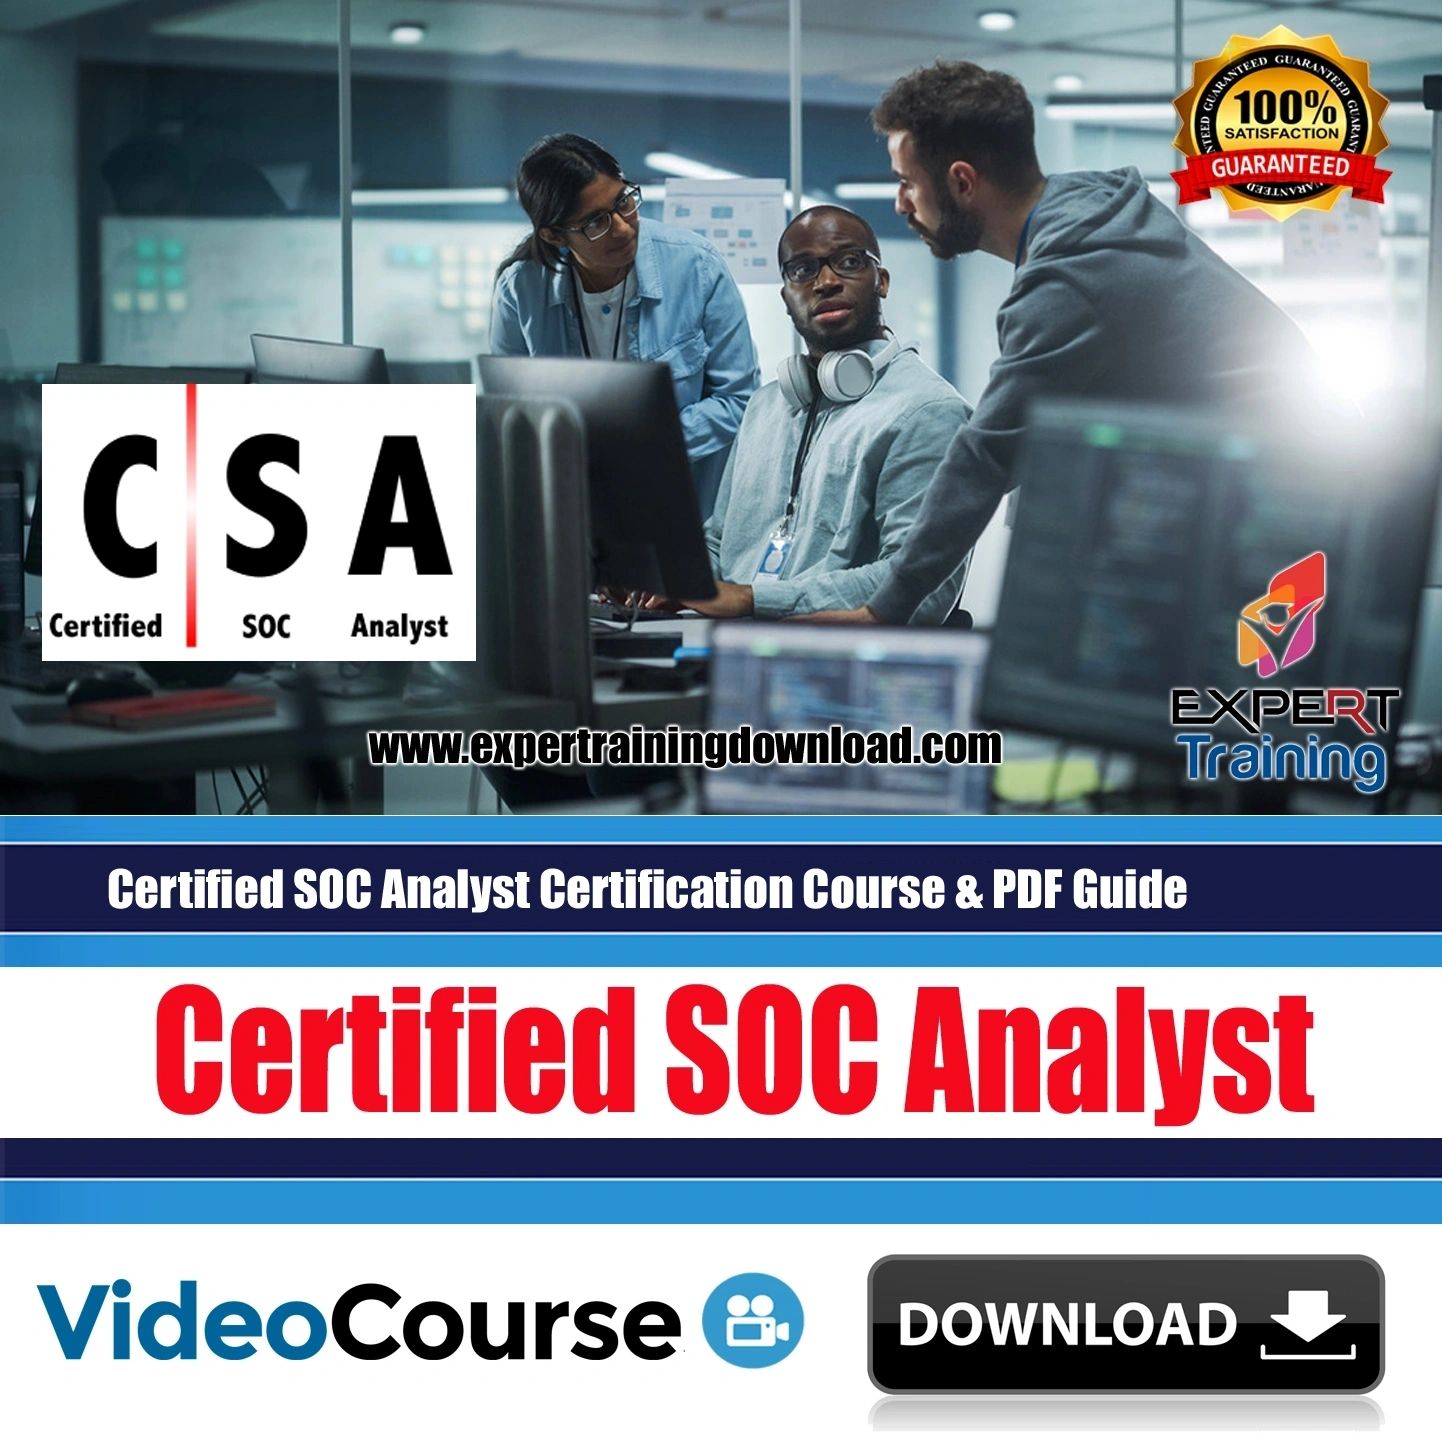 Certified SOC Analyst Certification Course, LAB & Exam Dump PDF Guides